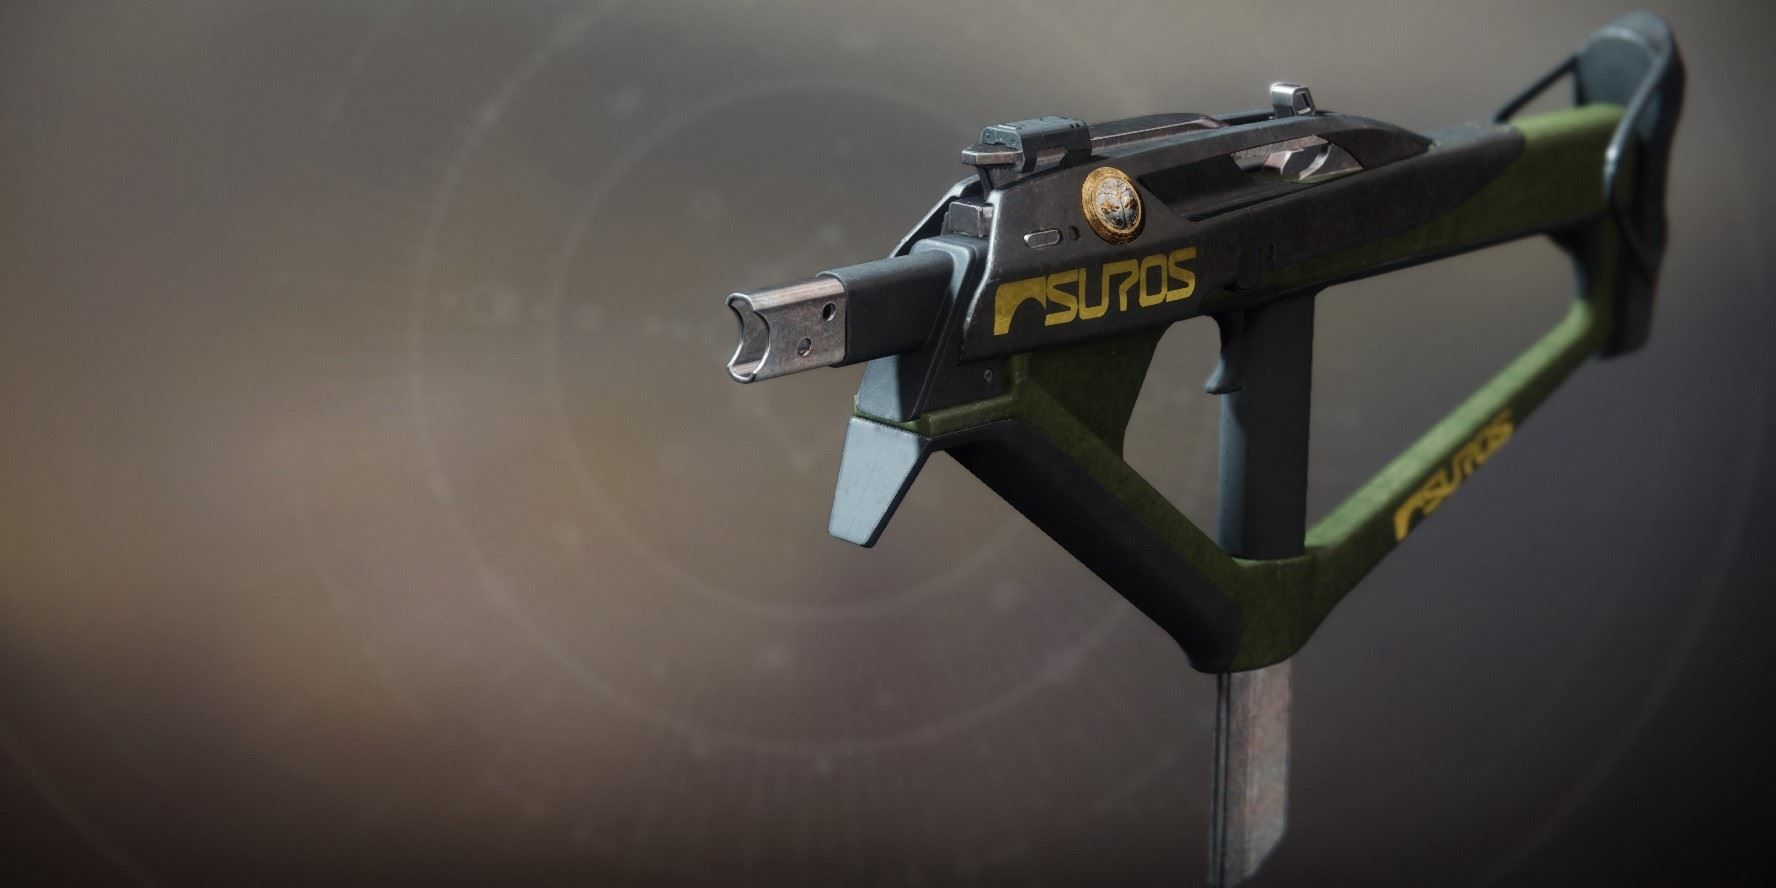 An in-game screenshot of Destiny 2's The Hero's Burden SMG. It has the Suros logo painted on its side.